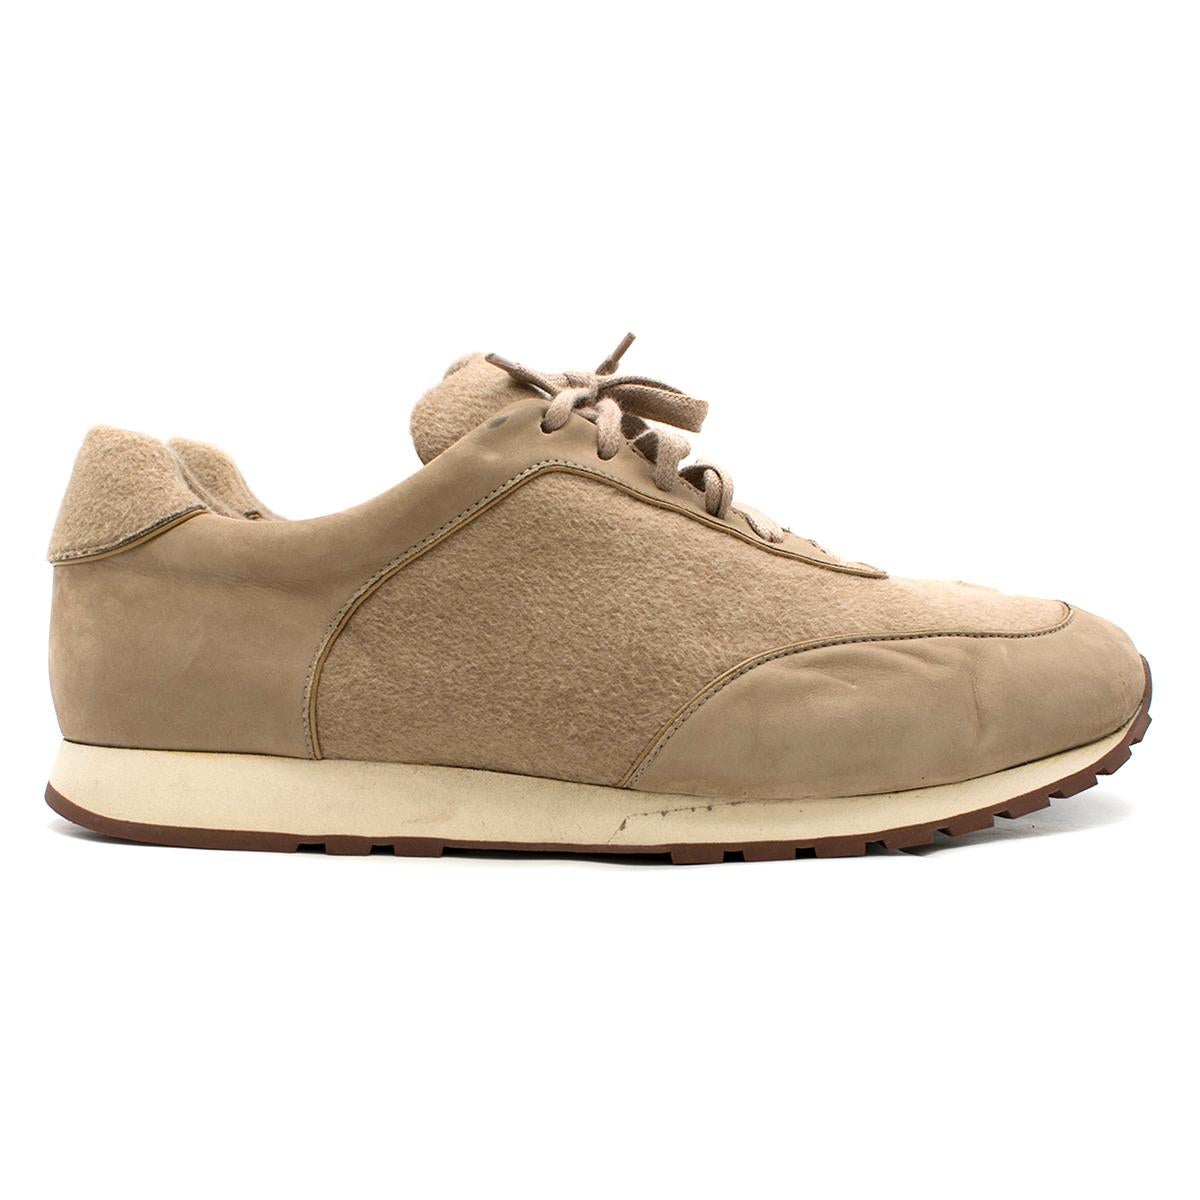 Loro Piana Weekend Walk Cashmere-felt Sneakers

- Tan sneakers
- Nubuck and cashmere-felt contrast fabrics
- Front lace up
- Sole in microporous material with a light rubber tread featuring the Loro Piana initials for a non-slip finish
- Brown